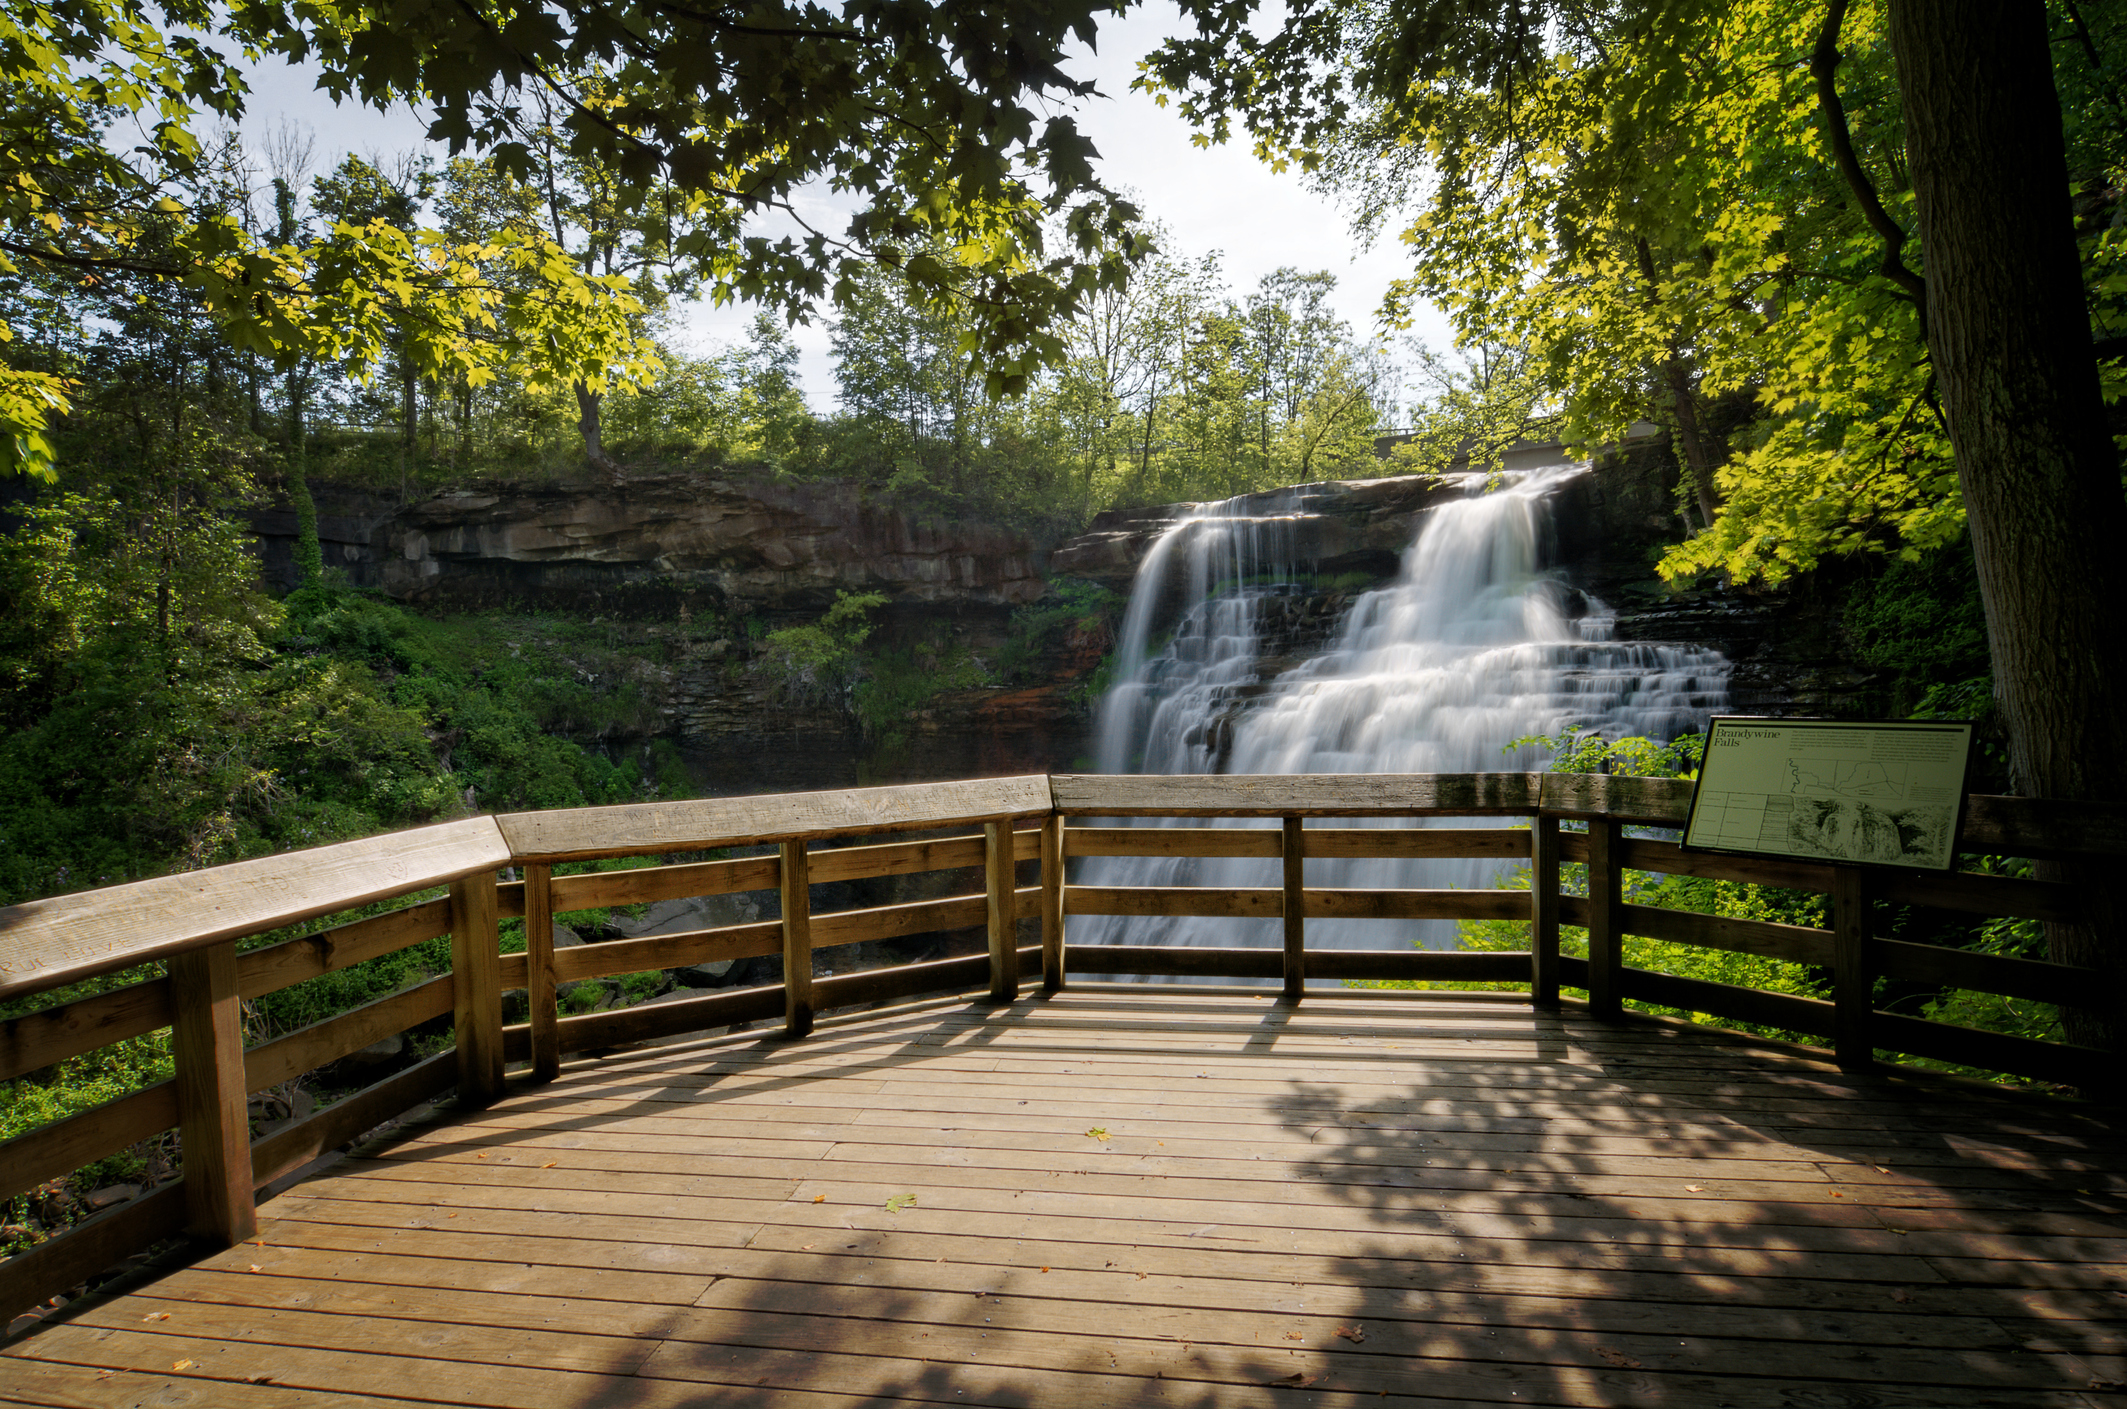 Cuyahoga Valley National Park is one of the top 10 most visited national parks in the U.S.